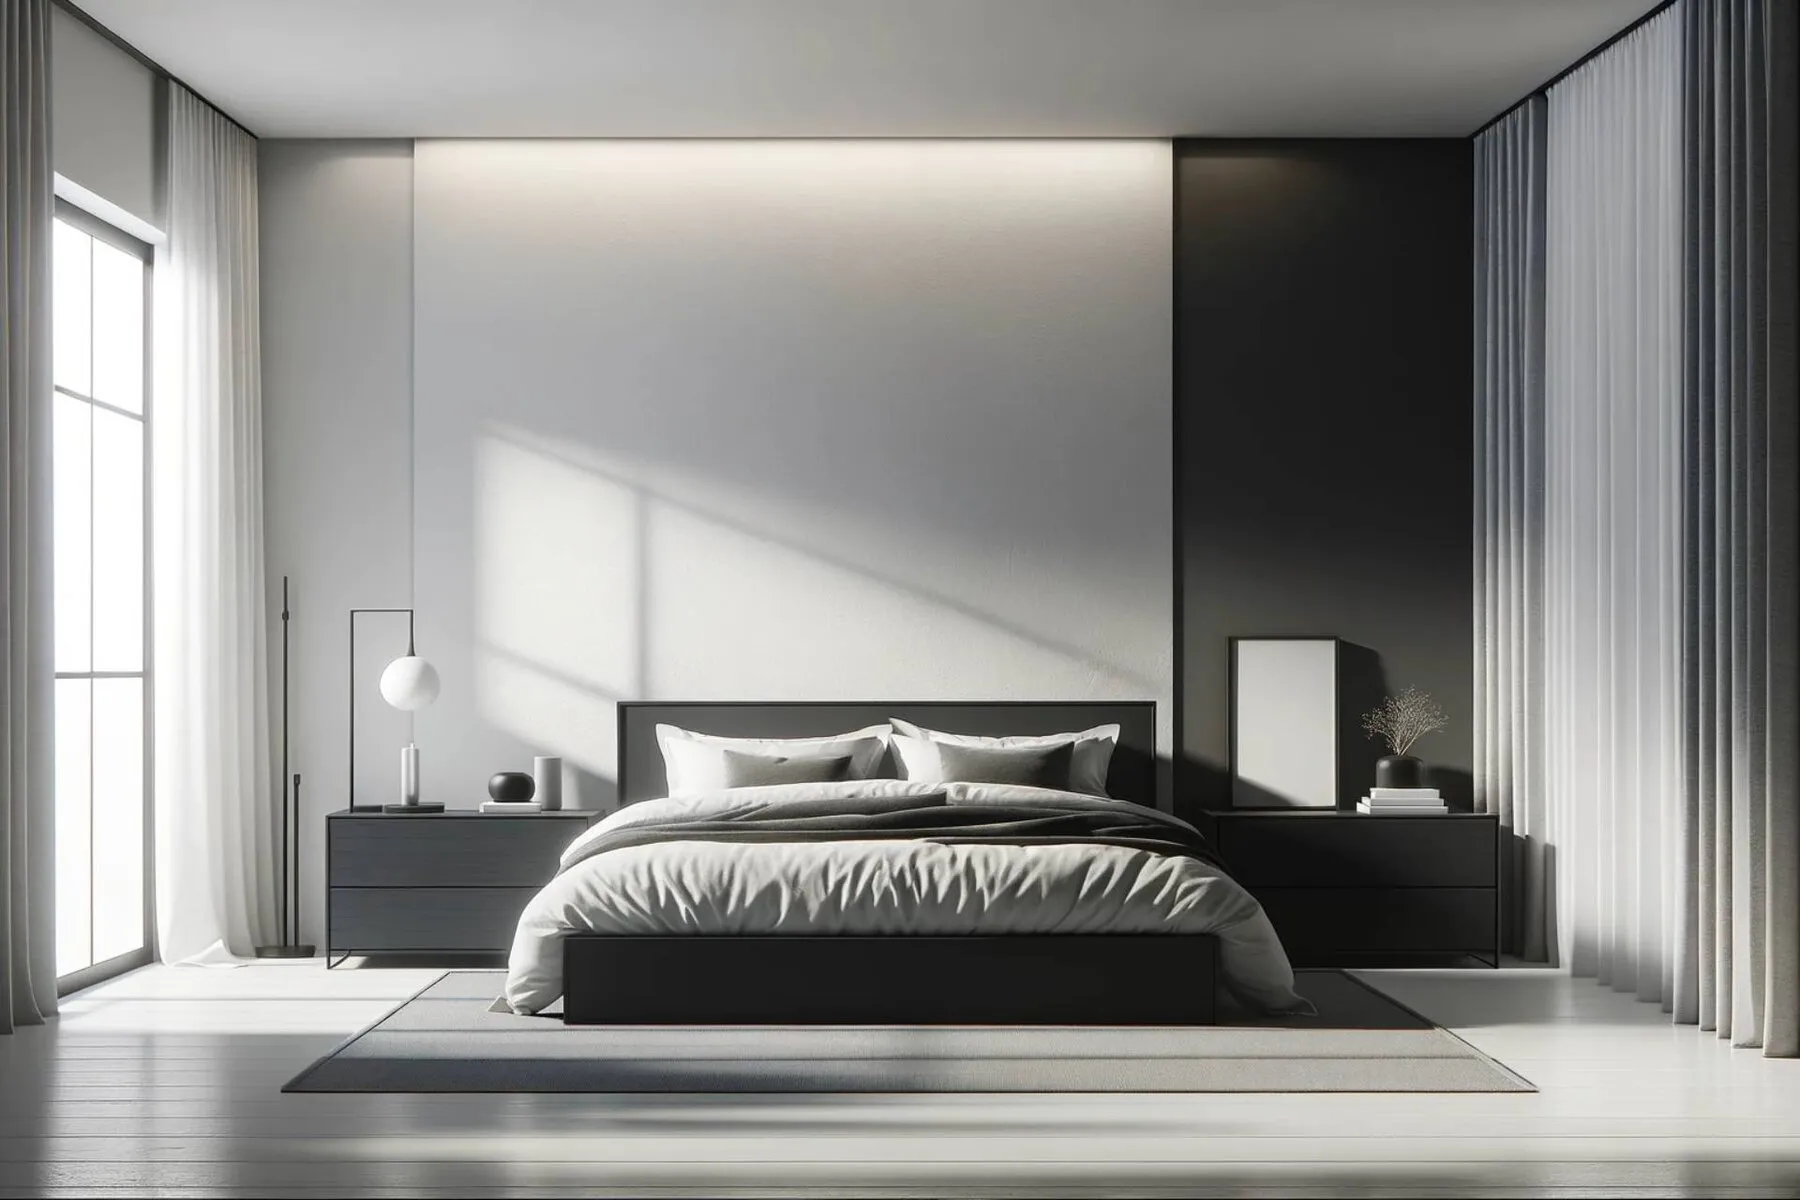 minimalist bedroom designed to showcase the principle of contrast to create emphasis